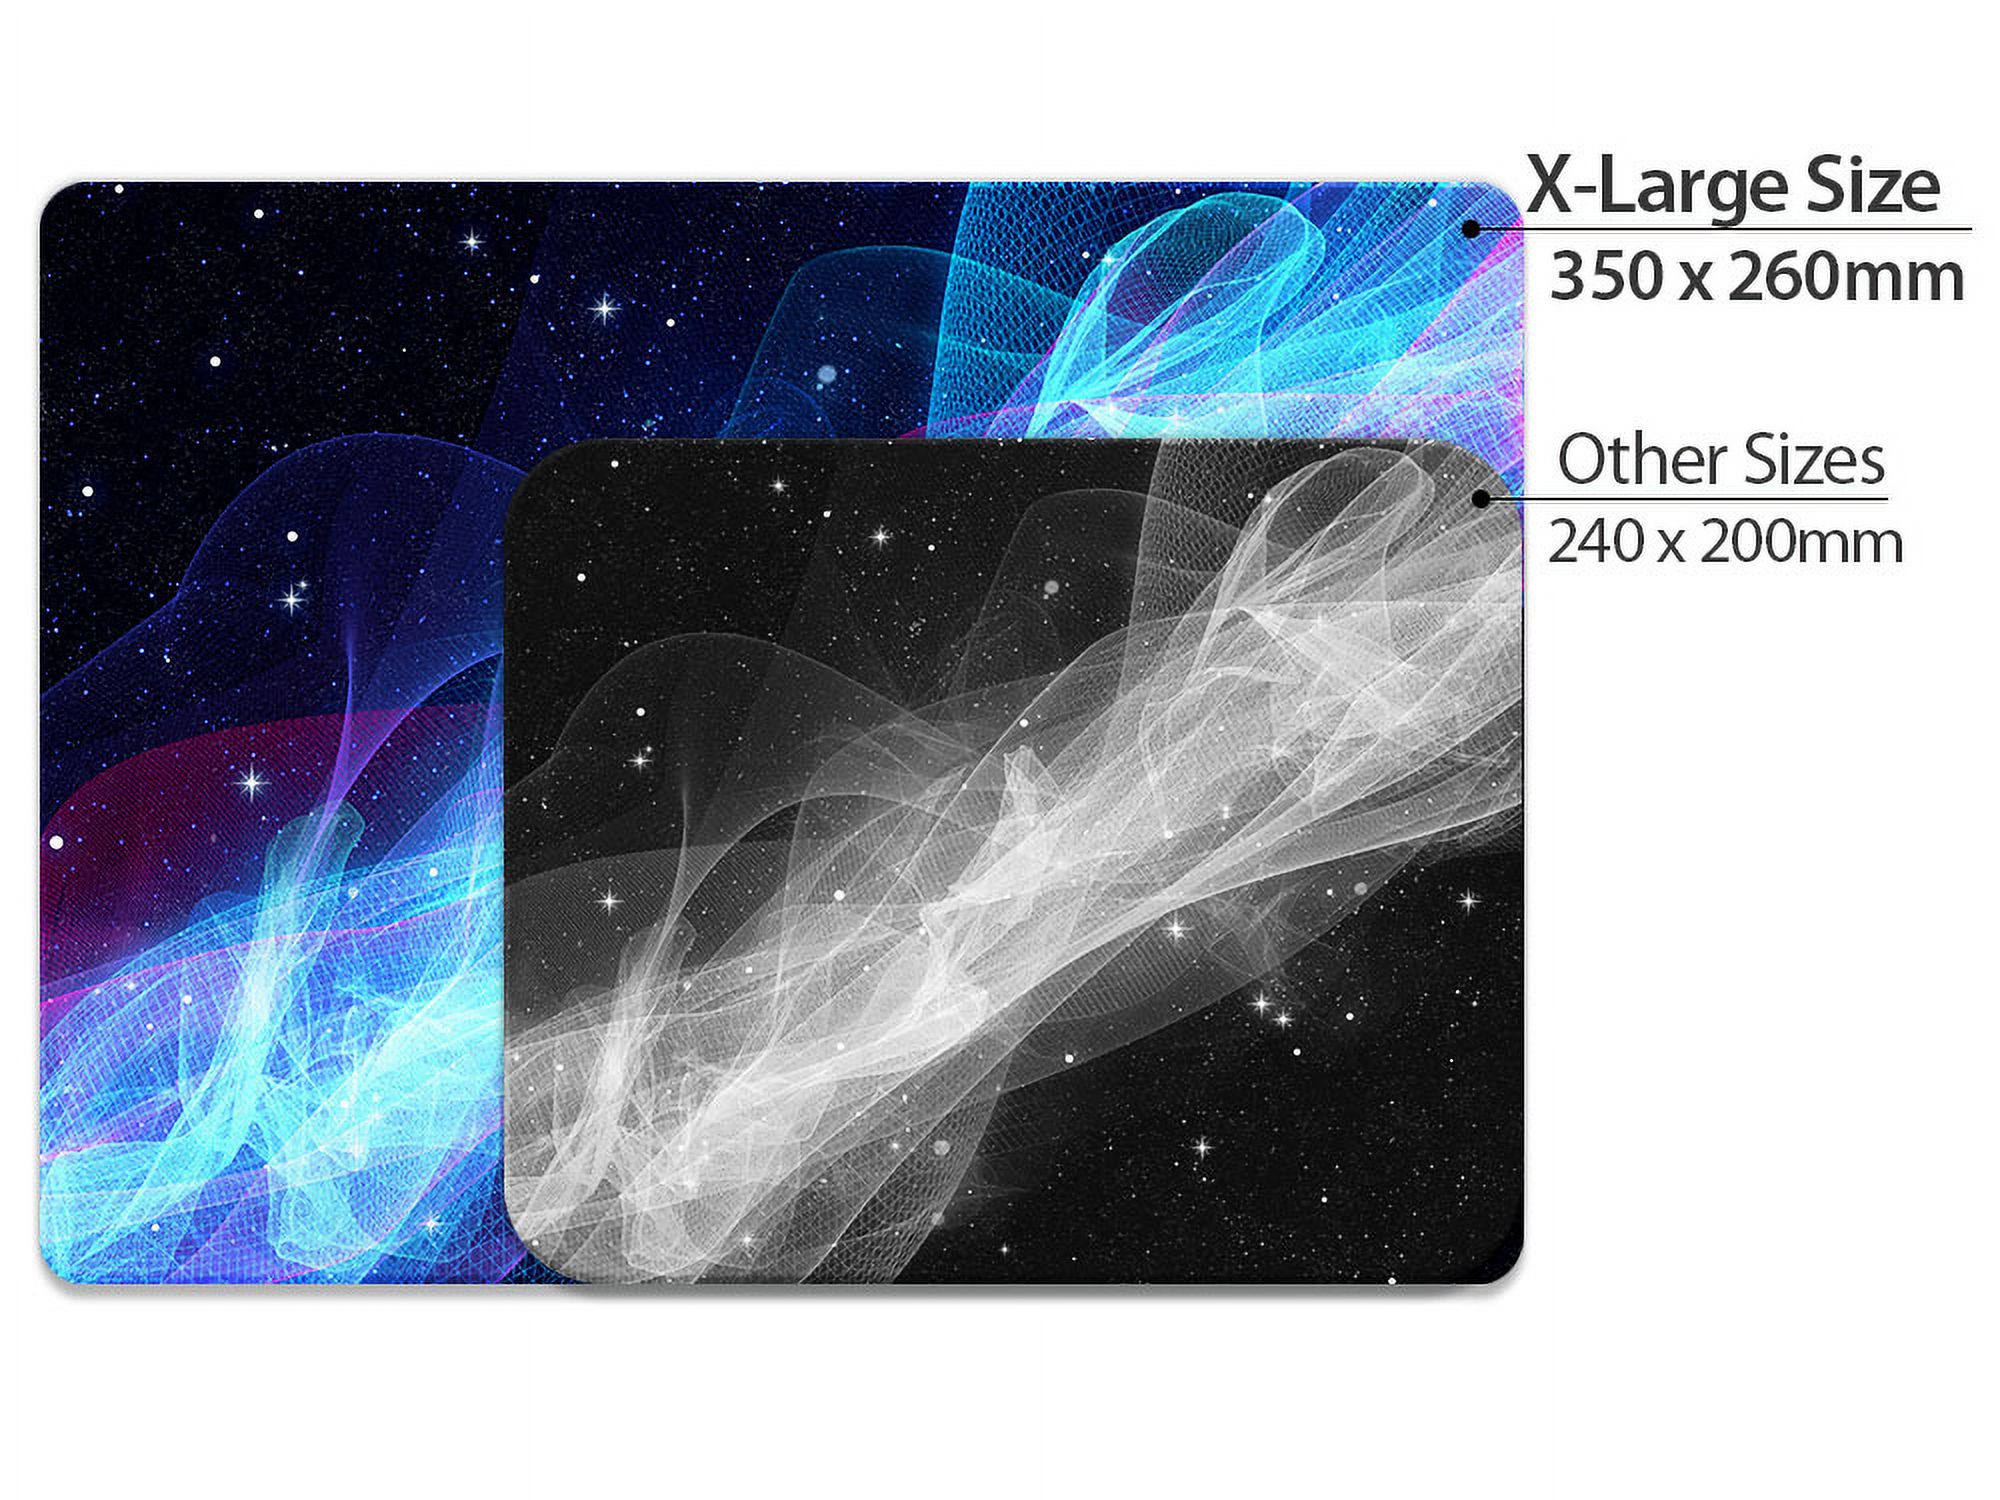 WIRESTER Super Size Rectangle Mouse Pad, Non-Slip X-Large Mouse Pad for Home, Office, and Gaming Desk - Glowing Space Wave - image 5 of 5